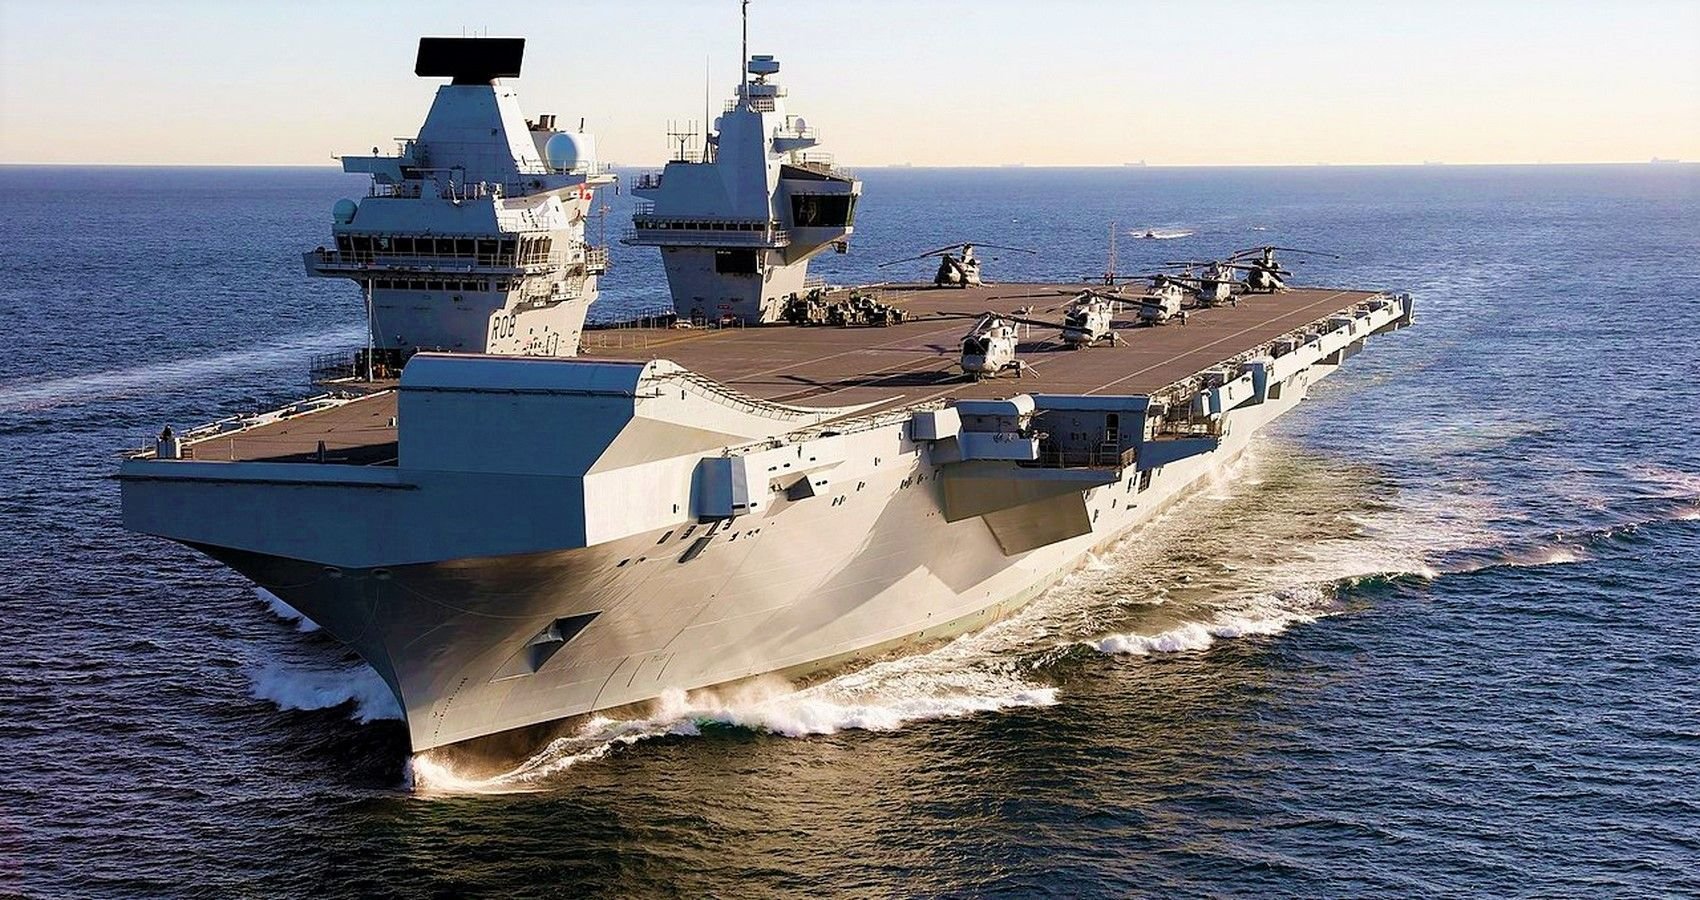 10 Things We Just Learned About the Royal Navy's Queen Elizabeth Class Carriers